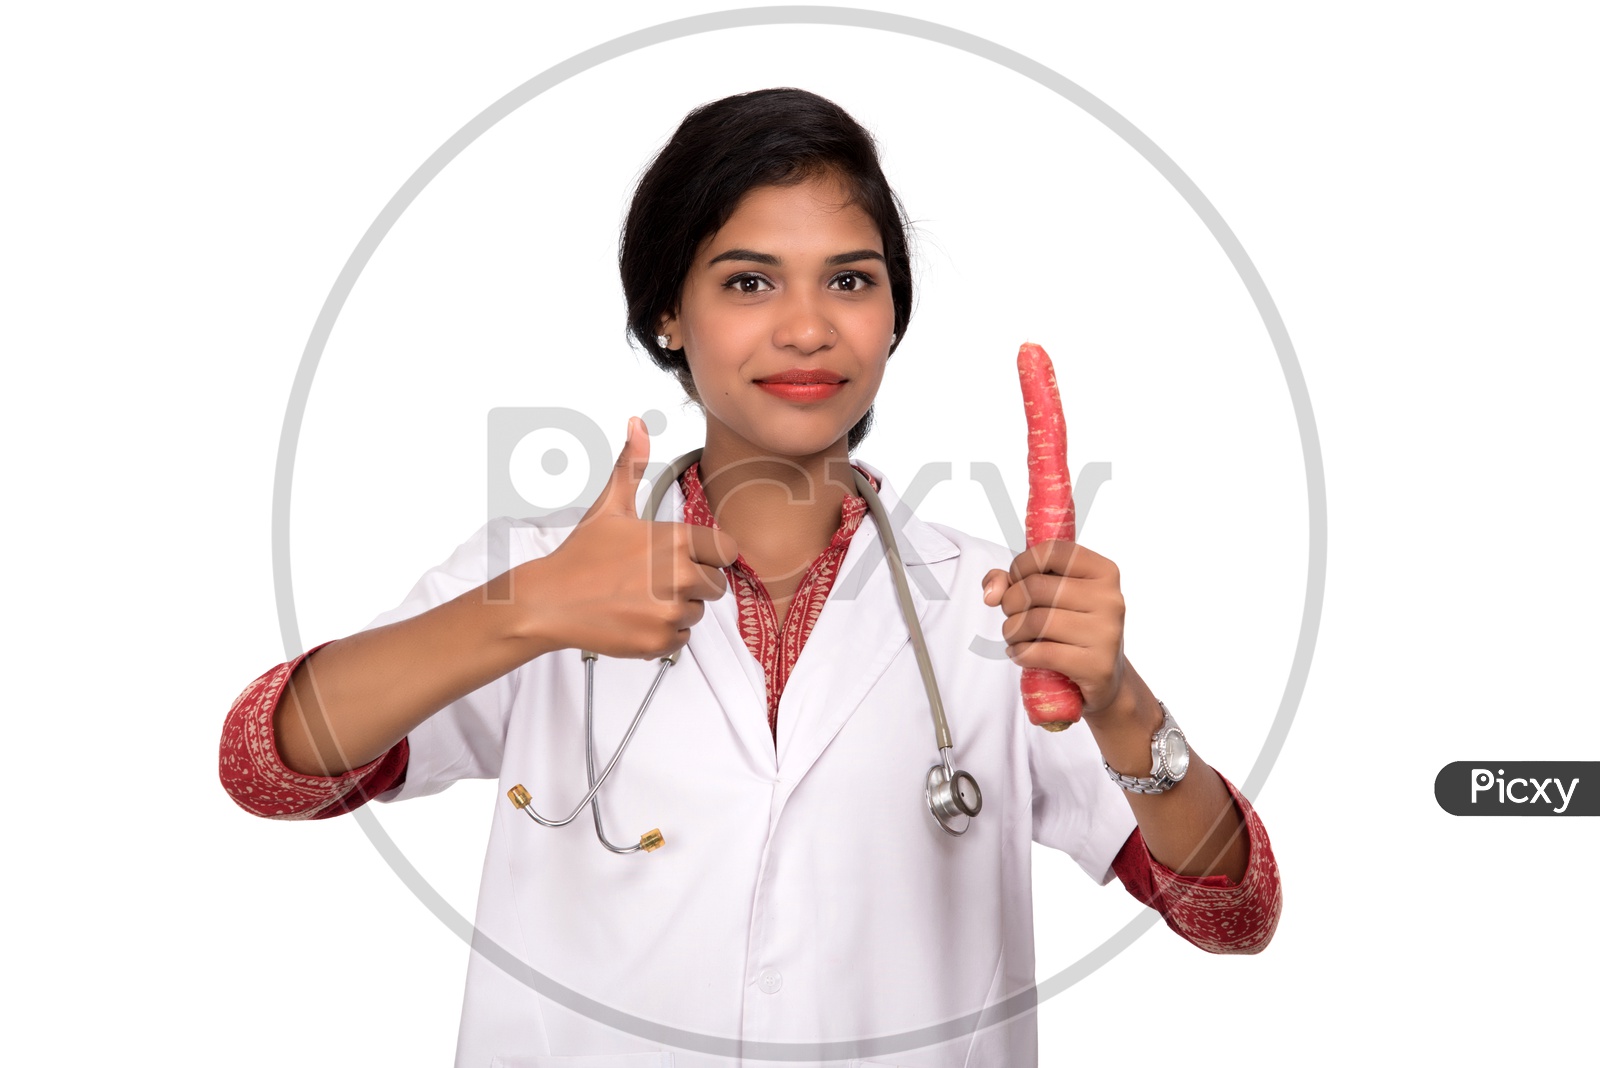 Indian Female Doctor holding carrot making a thumbs up sign